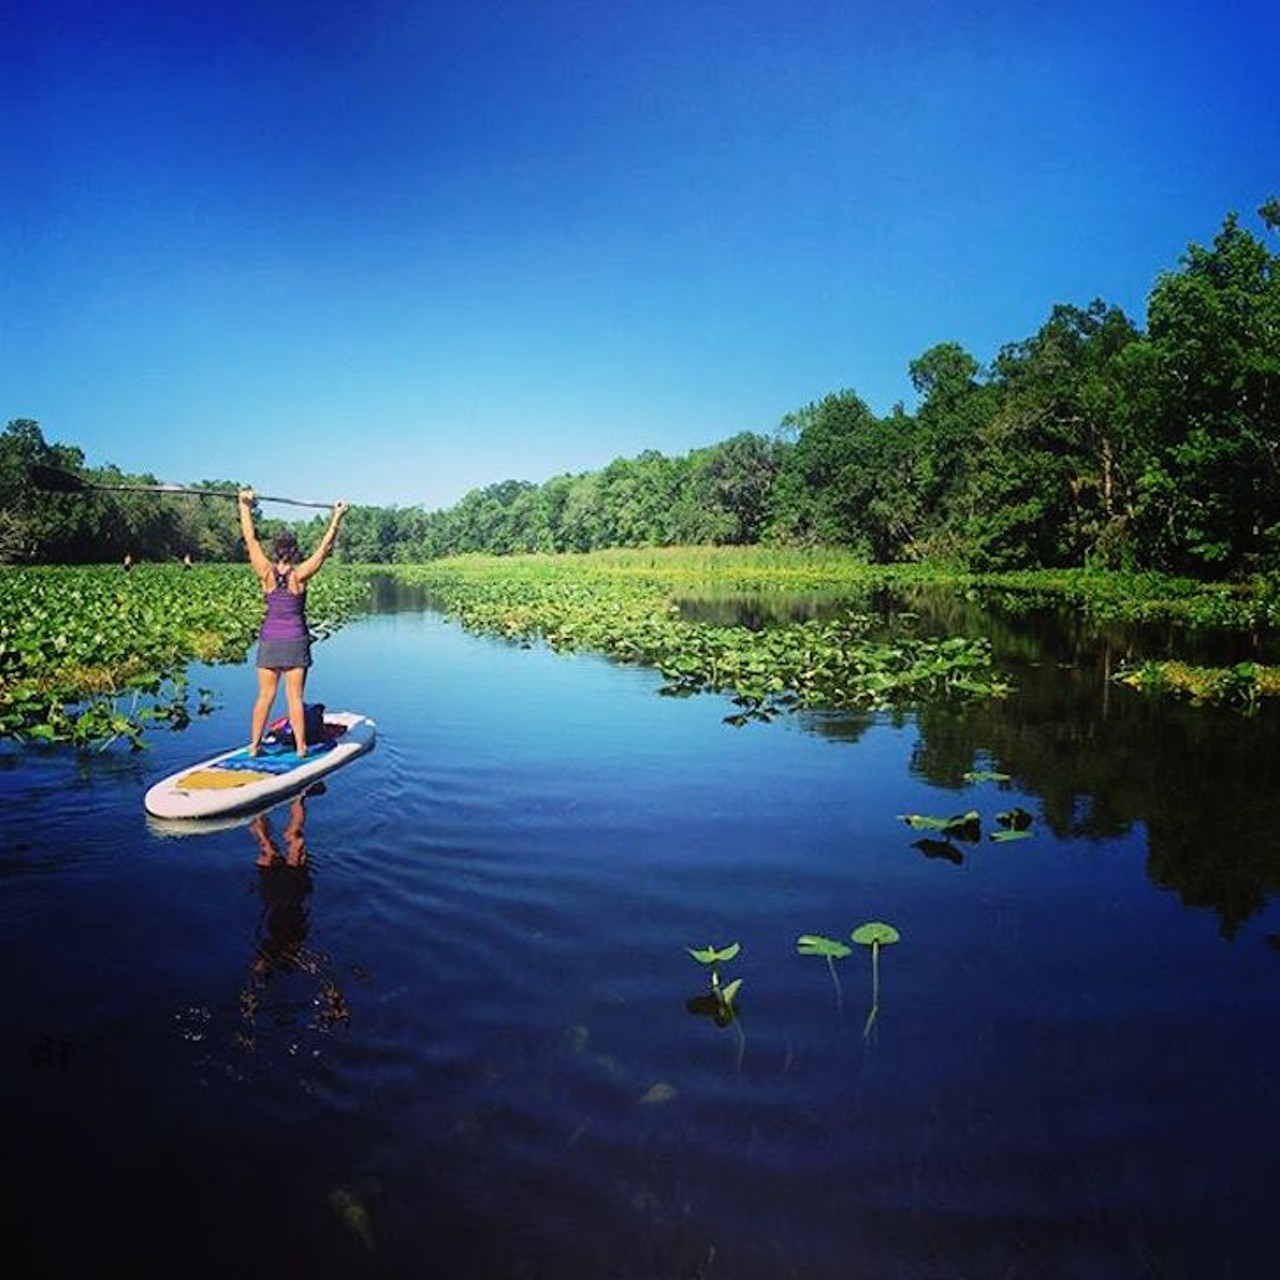 Wekiwa Springs
1800 Wekiwa Circle, Apopka
Distance from Orlando: 32 minutes
At Wekiwa Springs, you can take your time paddling the water to experience the historic scenery. Paddleboards can be rented at $20 for one hour, $35 for four hours, $10.65 per additional hour or $65 per day.
Photo via yoginictothep/Instagram